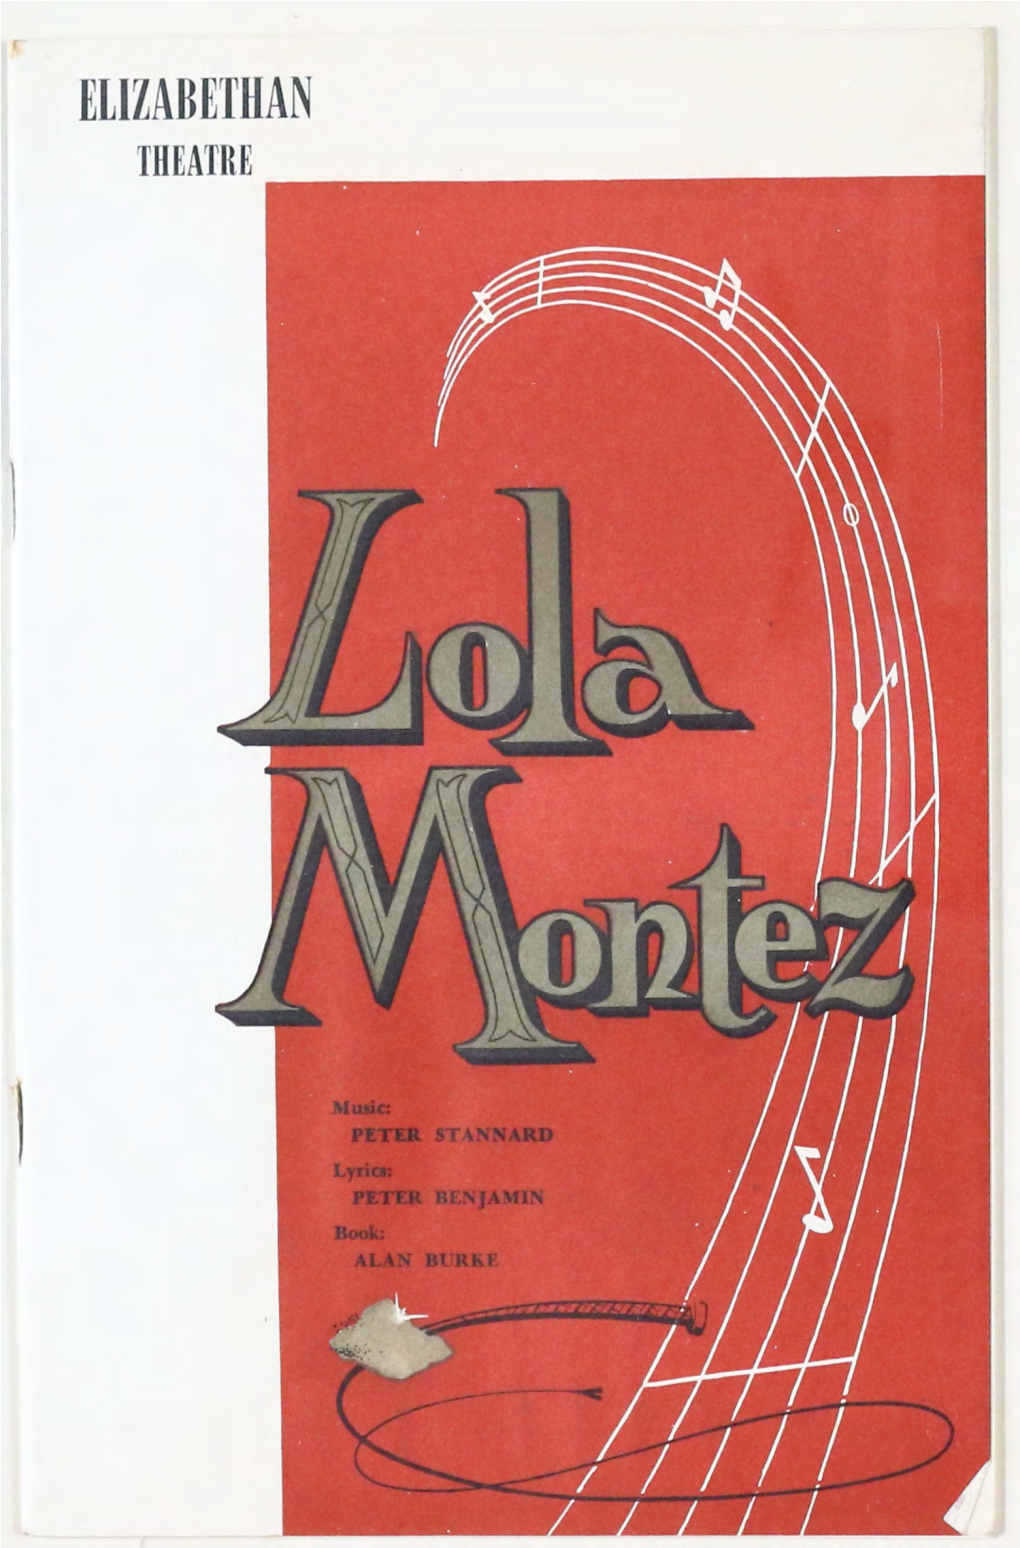 LOLA MONTEZ the Story of This Musical Is Based on Historical Fact